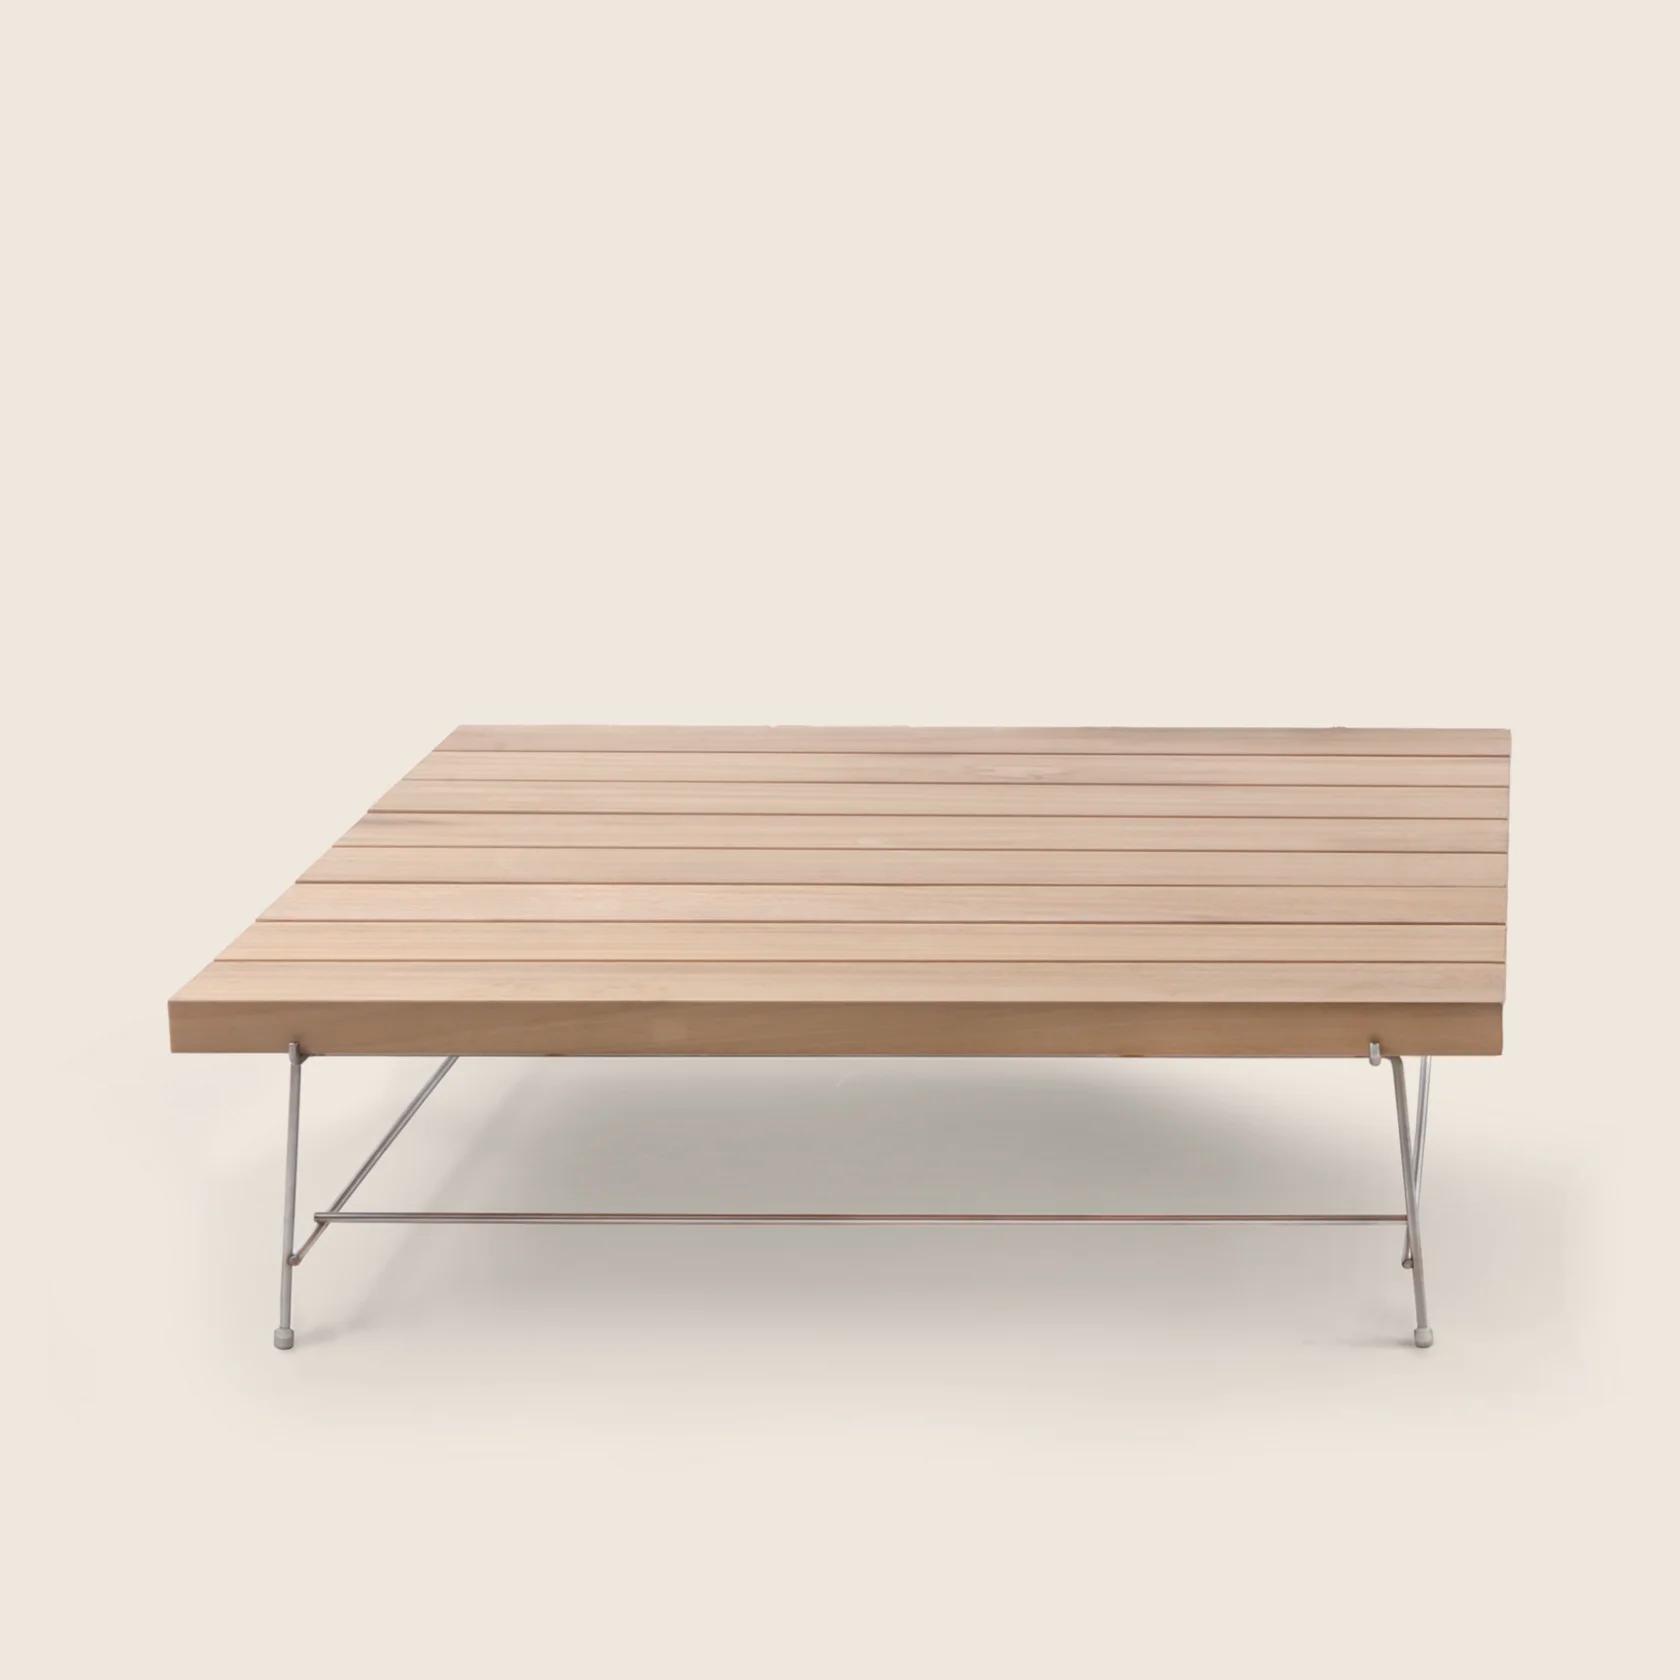 0282H0_ANY DAY OUTDOOR_COFFEETABLE_01.png